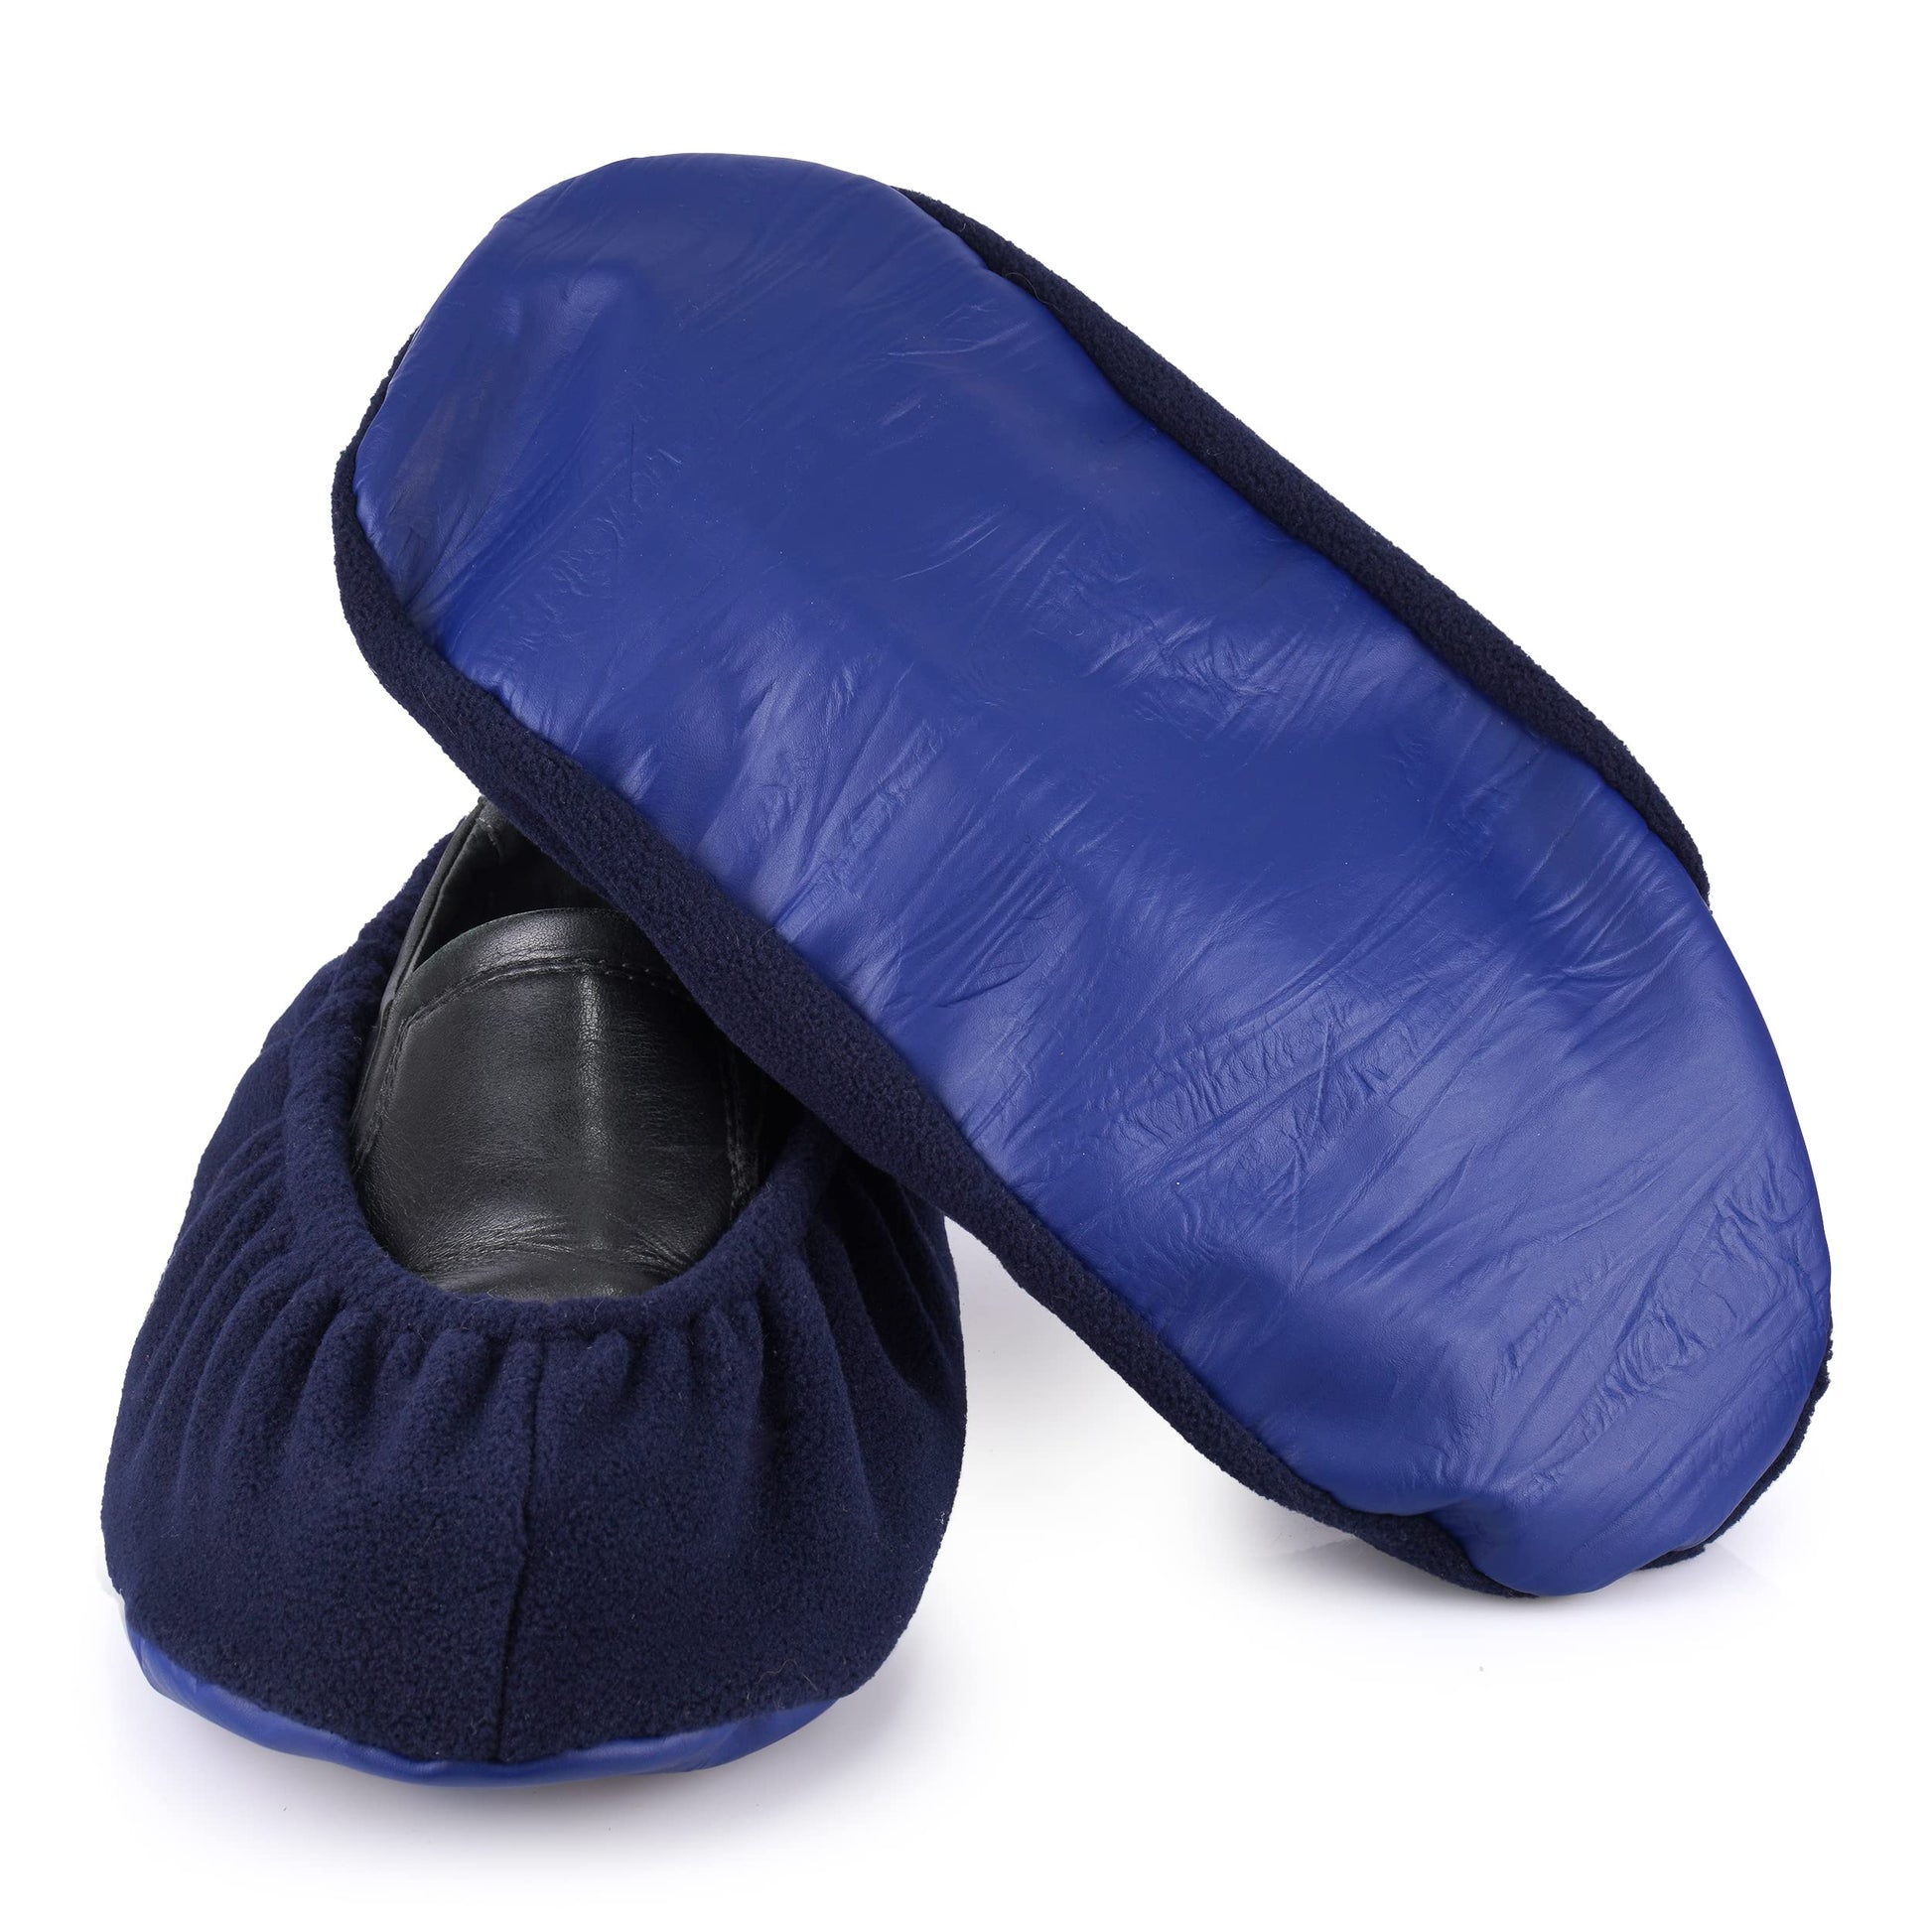 Chausse-Tout Shoe Covers Pro - 10 Years Warranty - Good For Summer Time - Less Ankle Coverage - 1 Pair - Roy Entreprise